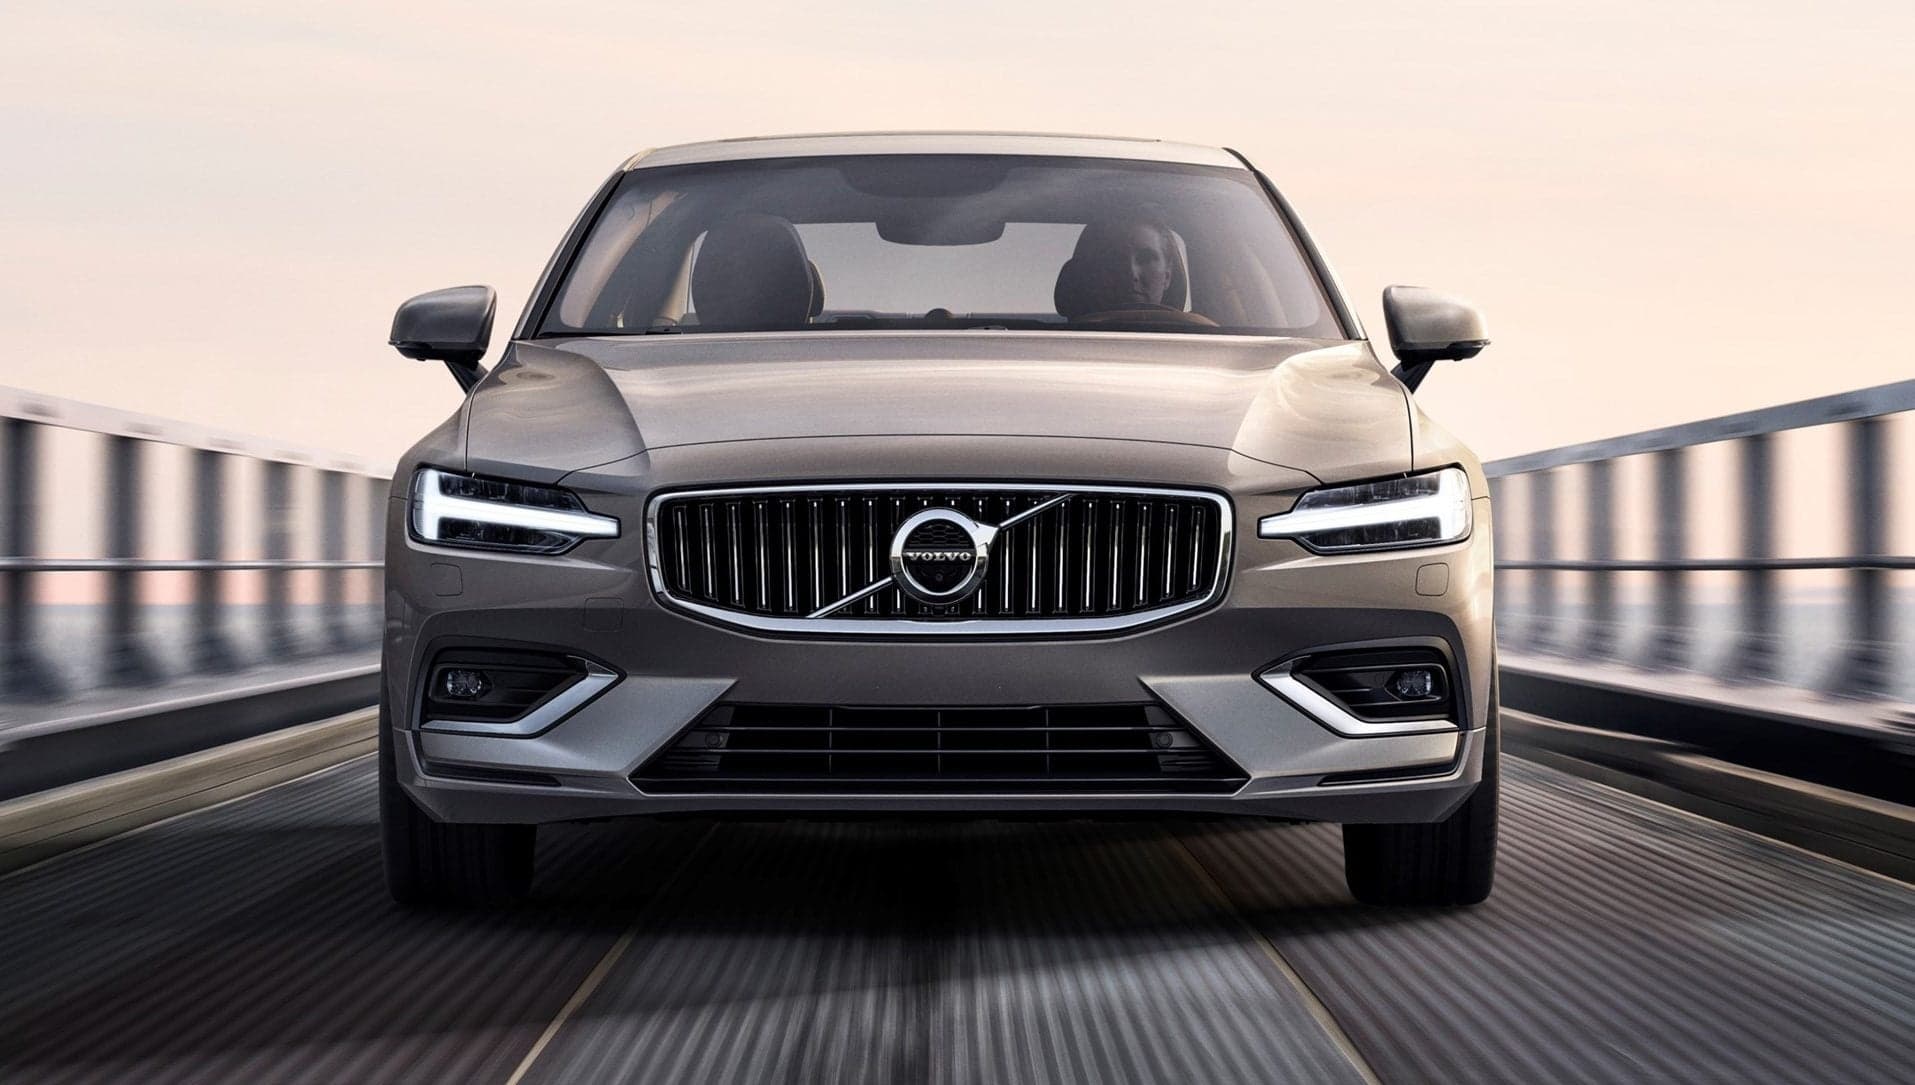 2019 Volvo S60: Born in the USA at Volvo’s First American Factory